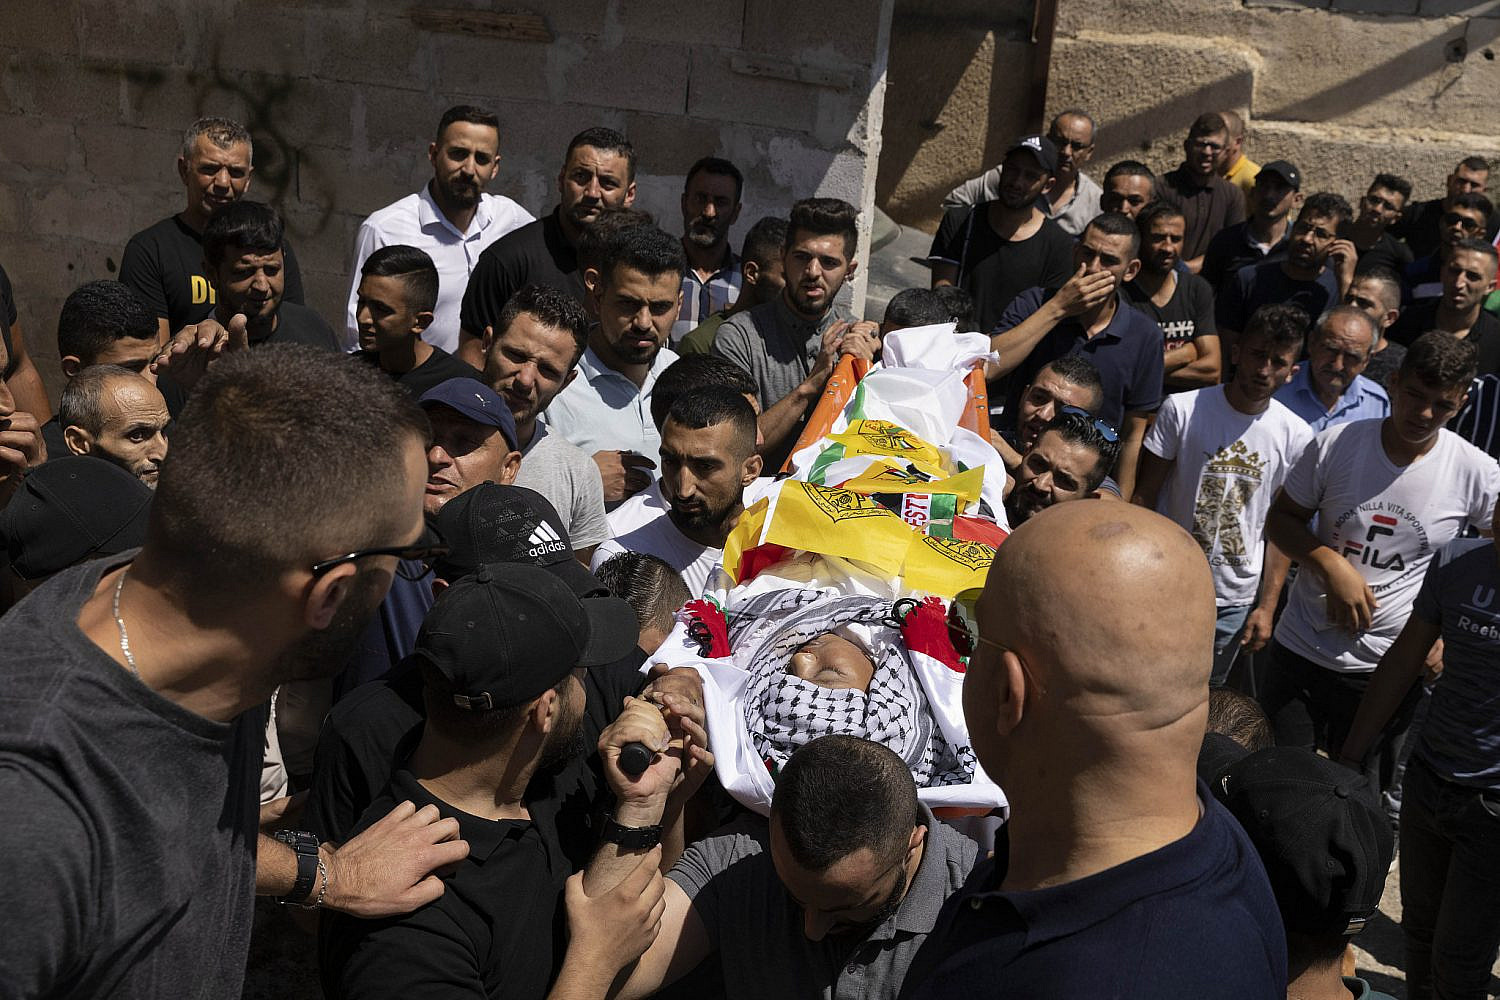 Funeral of 12-year-old Mohammed al Alami, in the village of Beit Ummar, north of Hebron. Alami was shot by Israeli soldiers while sitting in the passenger side of his family's car as he and his father returned from buying vegetables. July 29, 2021. (Oren Ziv/Activestills)